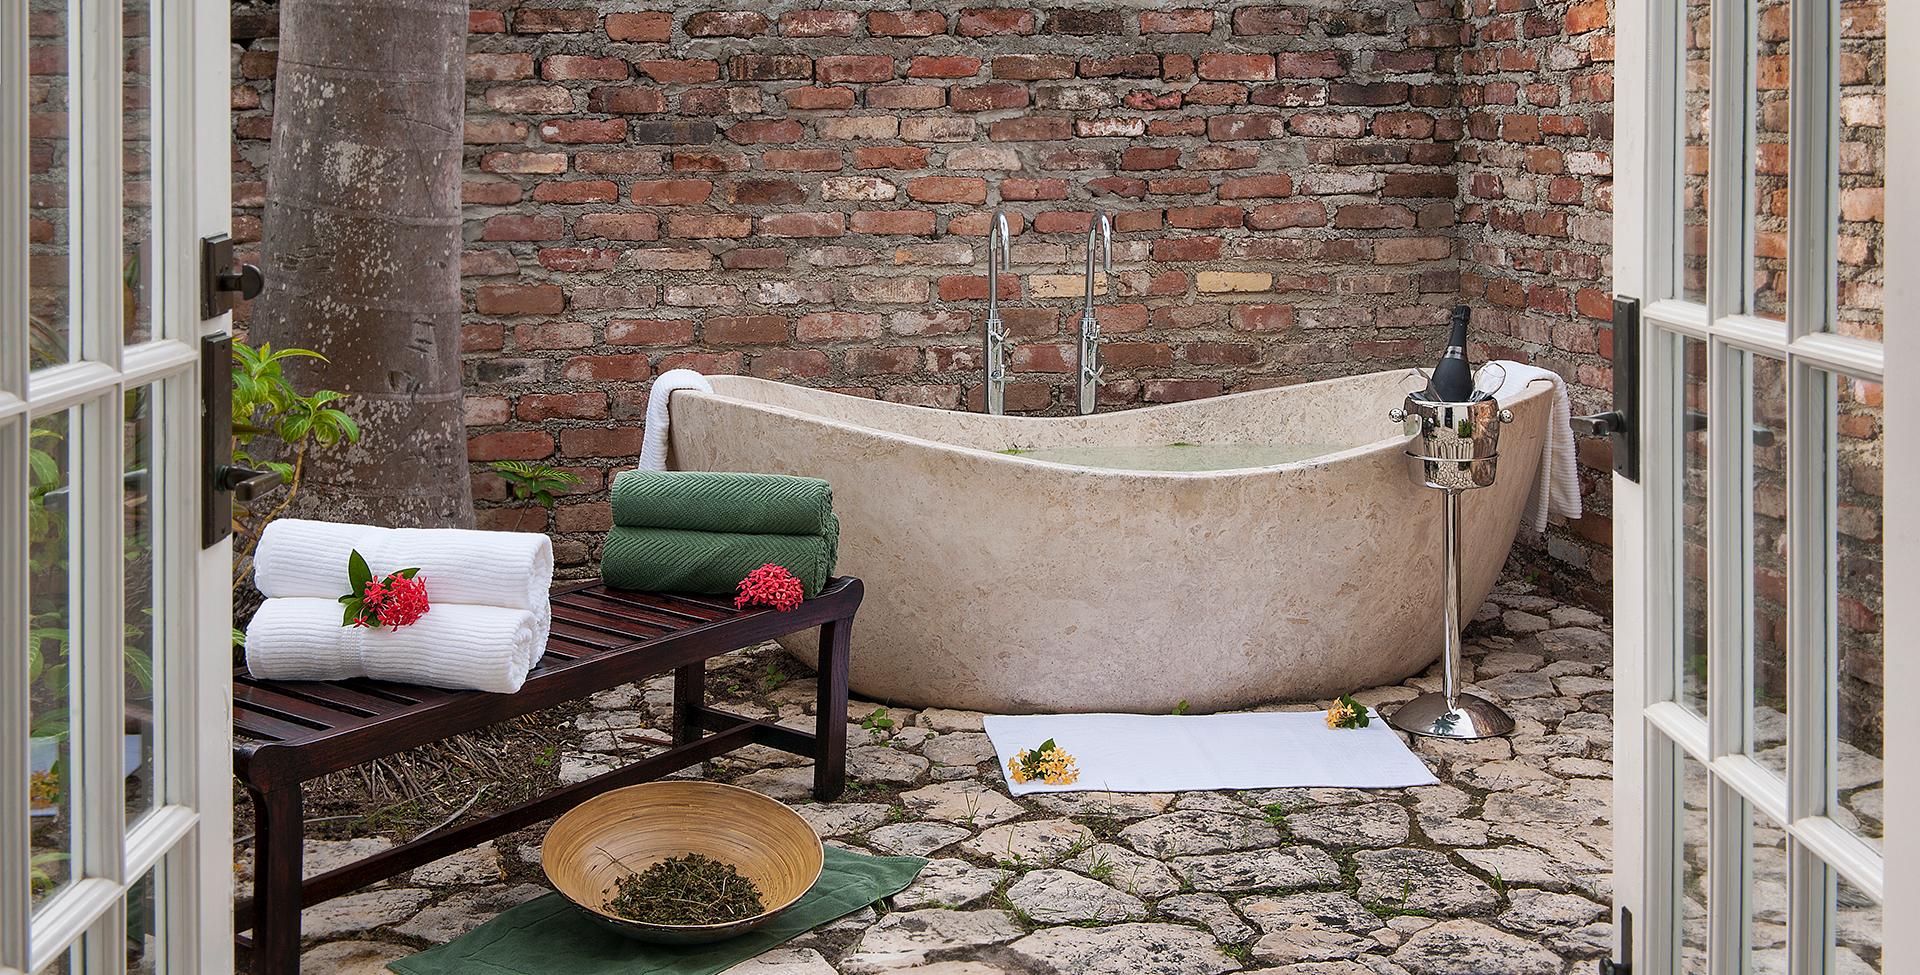 A bathtub and a table in front of a brick wall